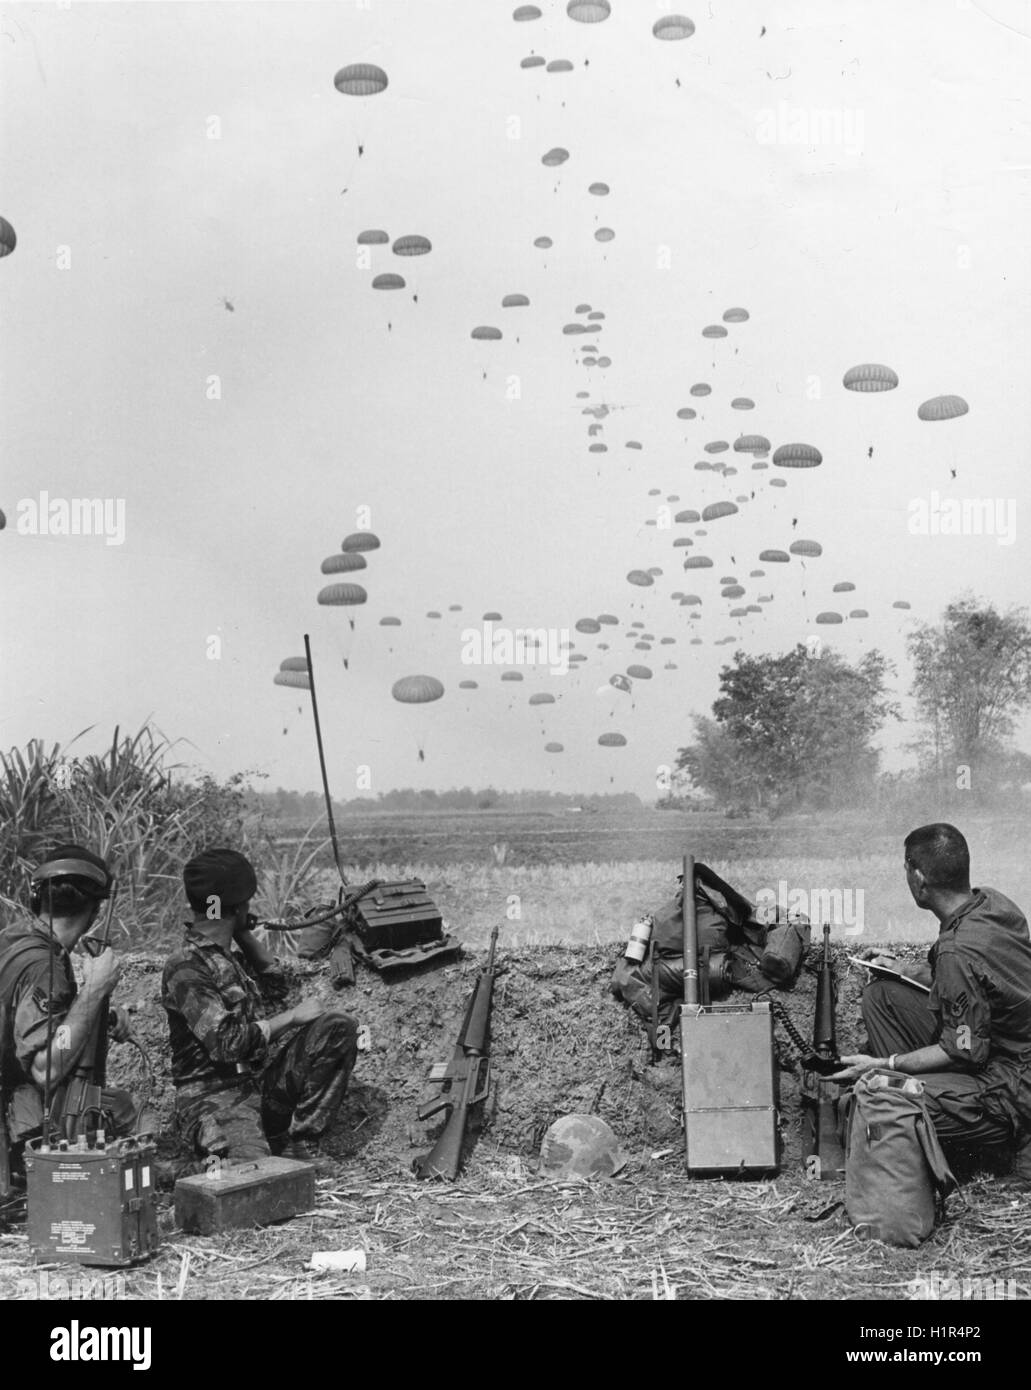 Members of the First US Air Force Combat Control Team watch paratroopers of the Army of Vietnam Airborne Division drop into a Viet Cong infiltrated area. Stock Photo